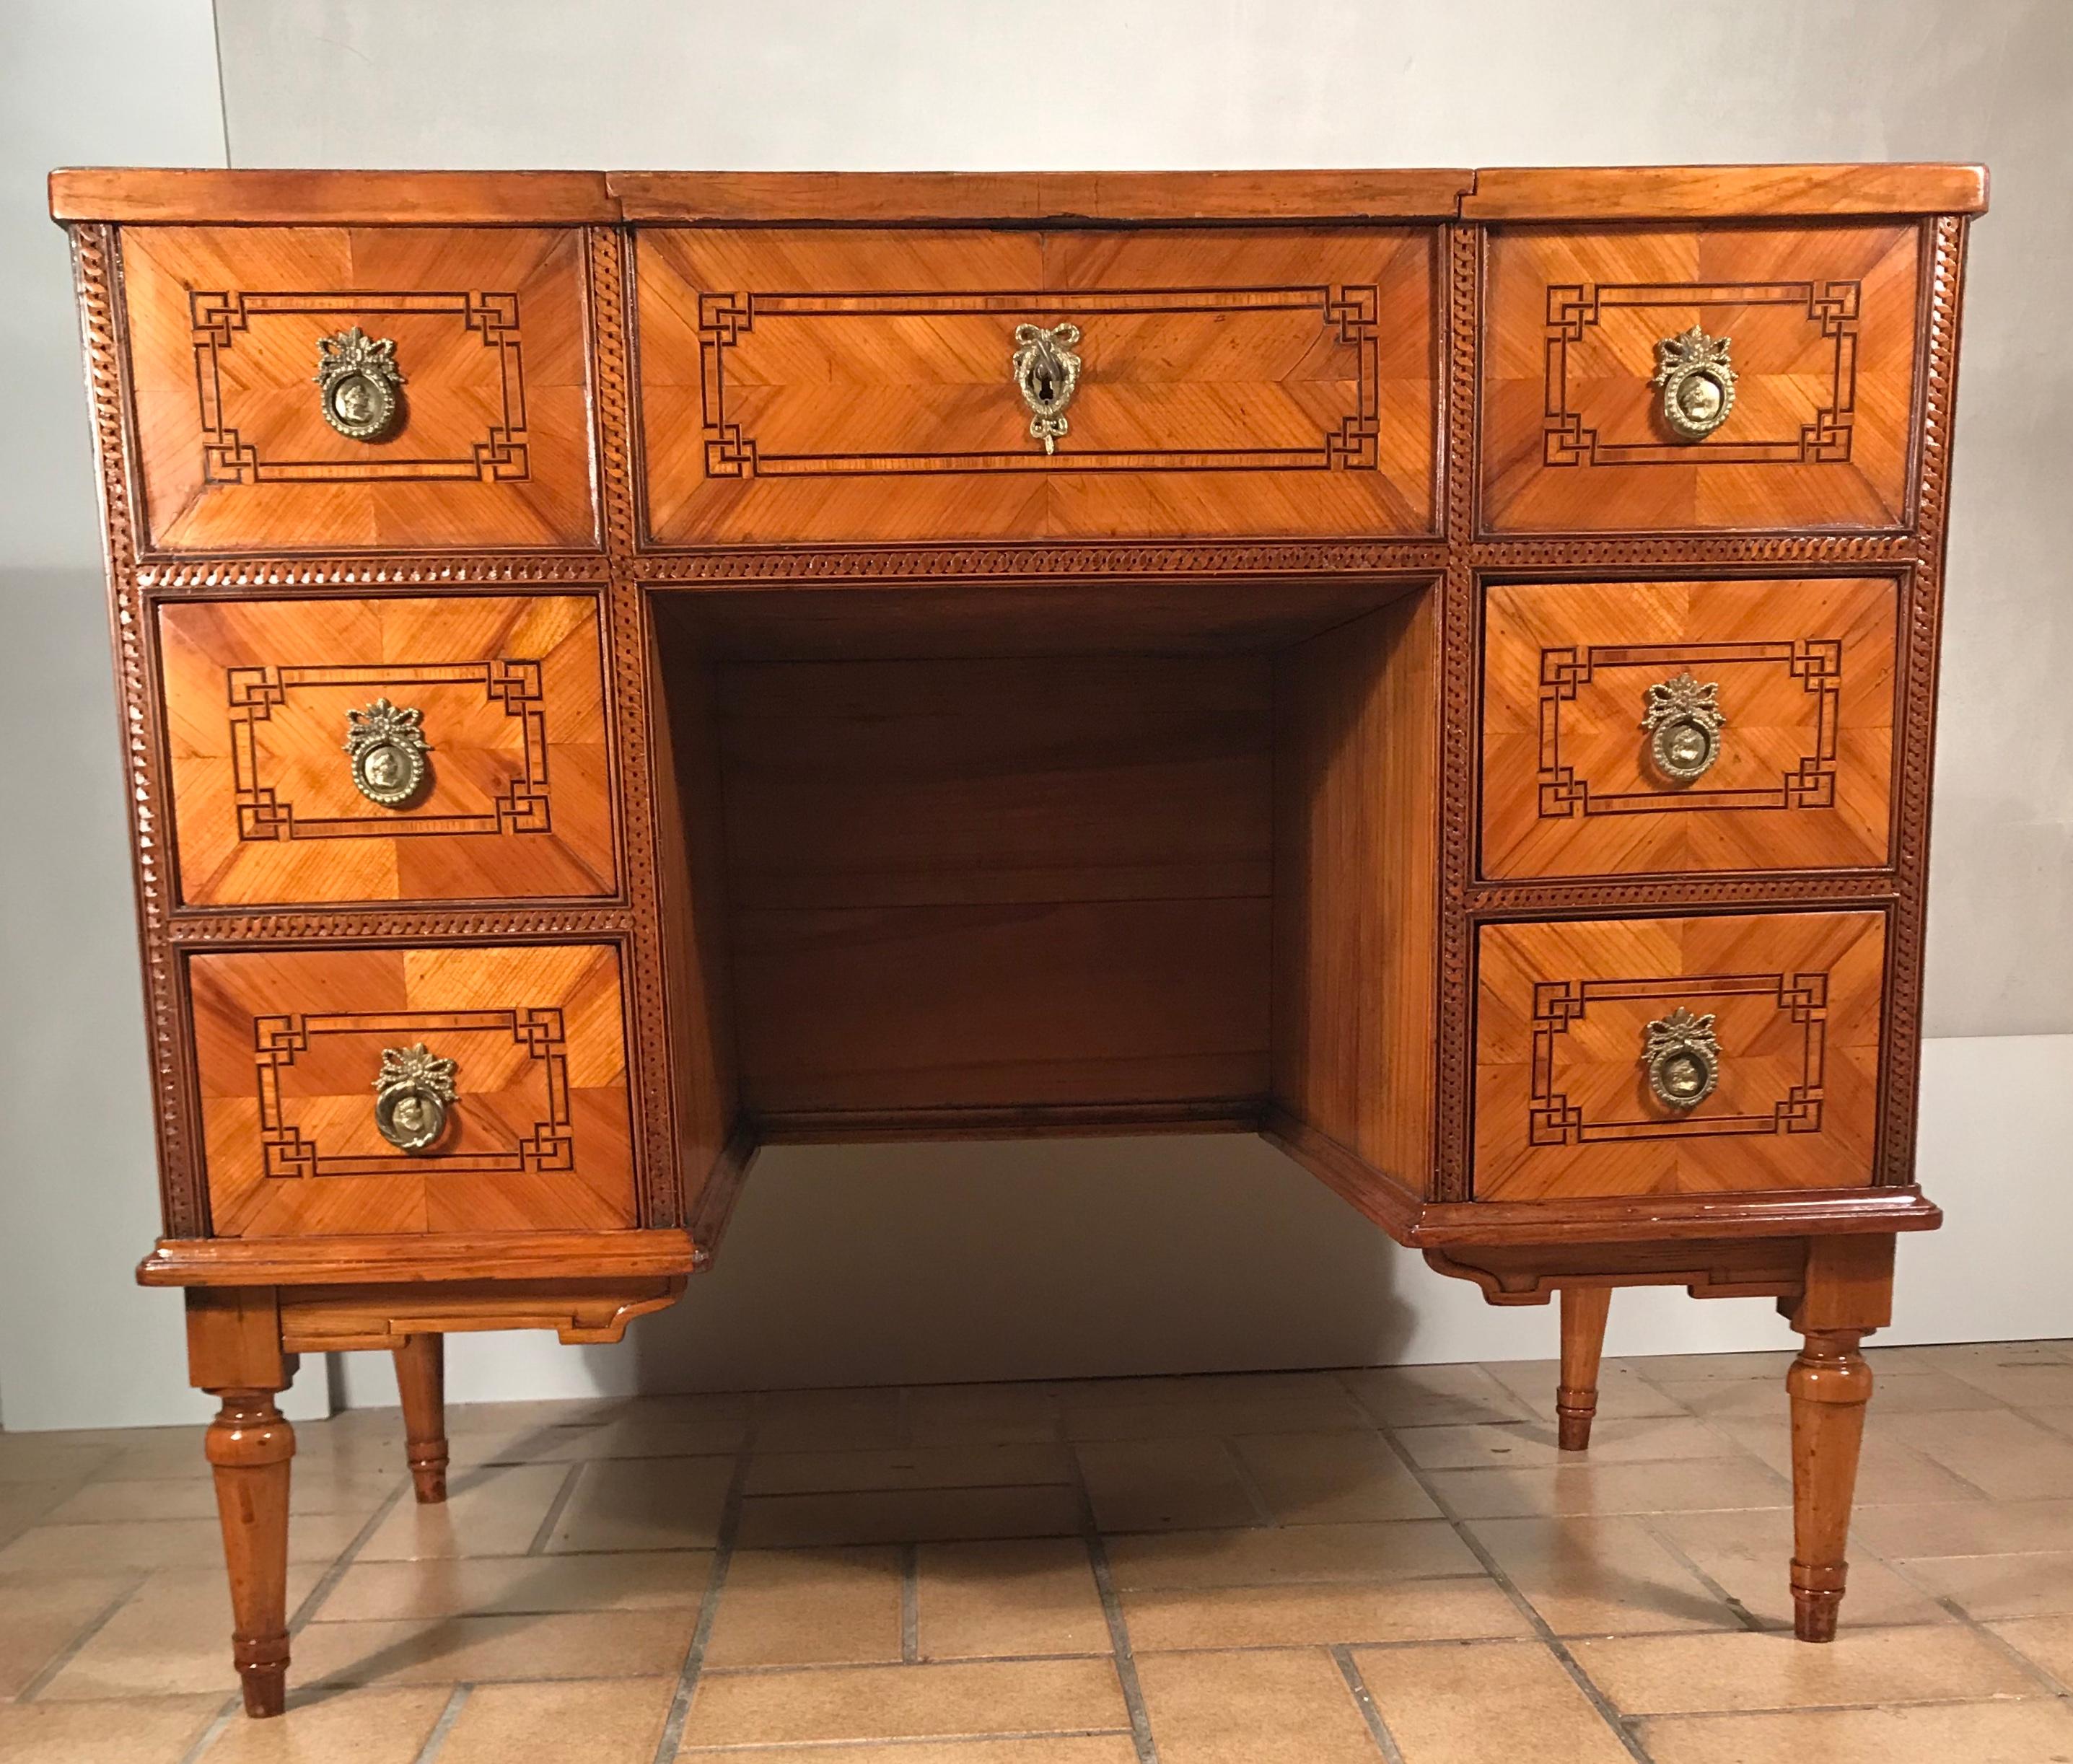 Exquisite Louis XVI dressing table, South East Germany, Würzburg region 1780. Cherry veneer with elm wood marquetry. The table has one central compartment with a flip up mirror and one additional compartment on each side. Furthermore, the front has